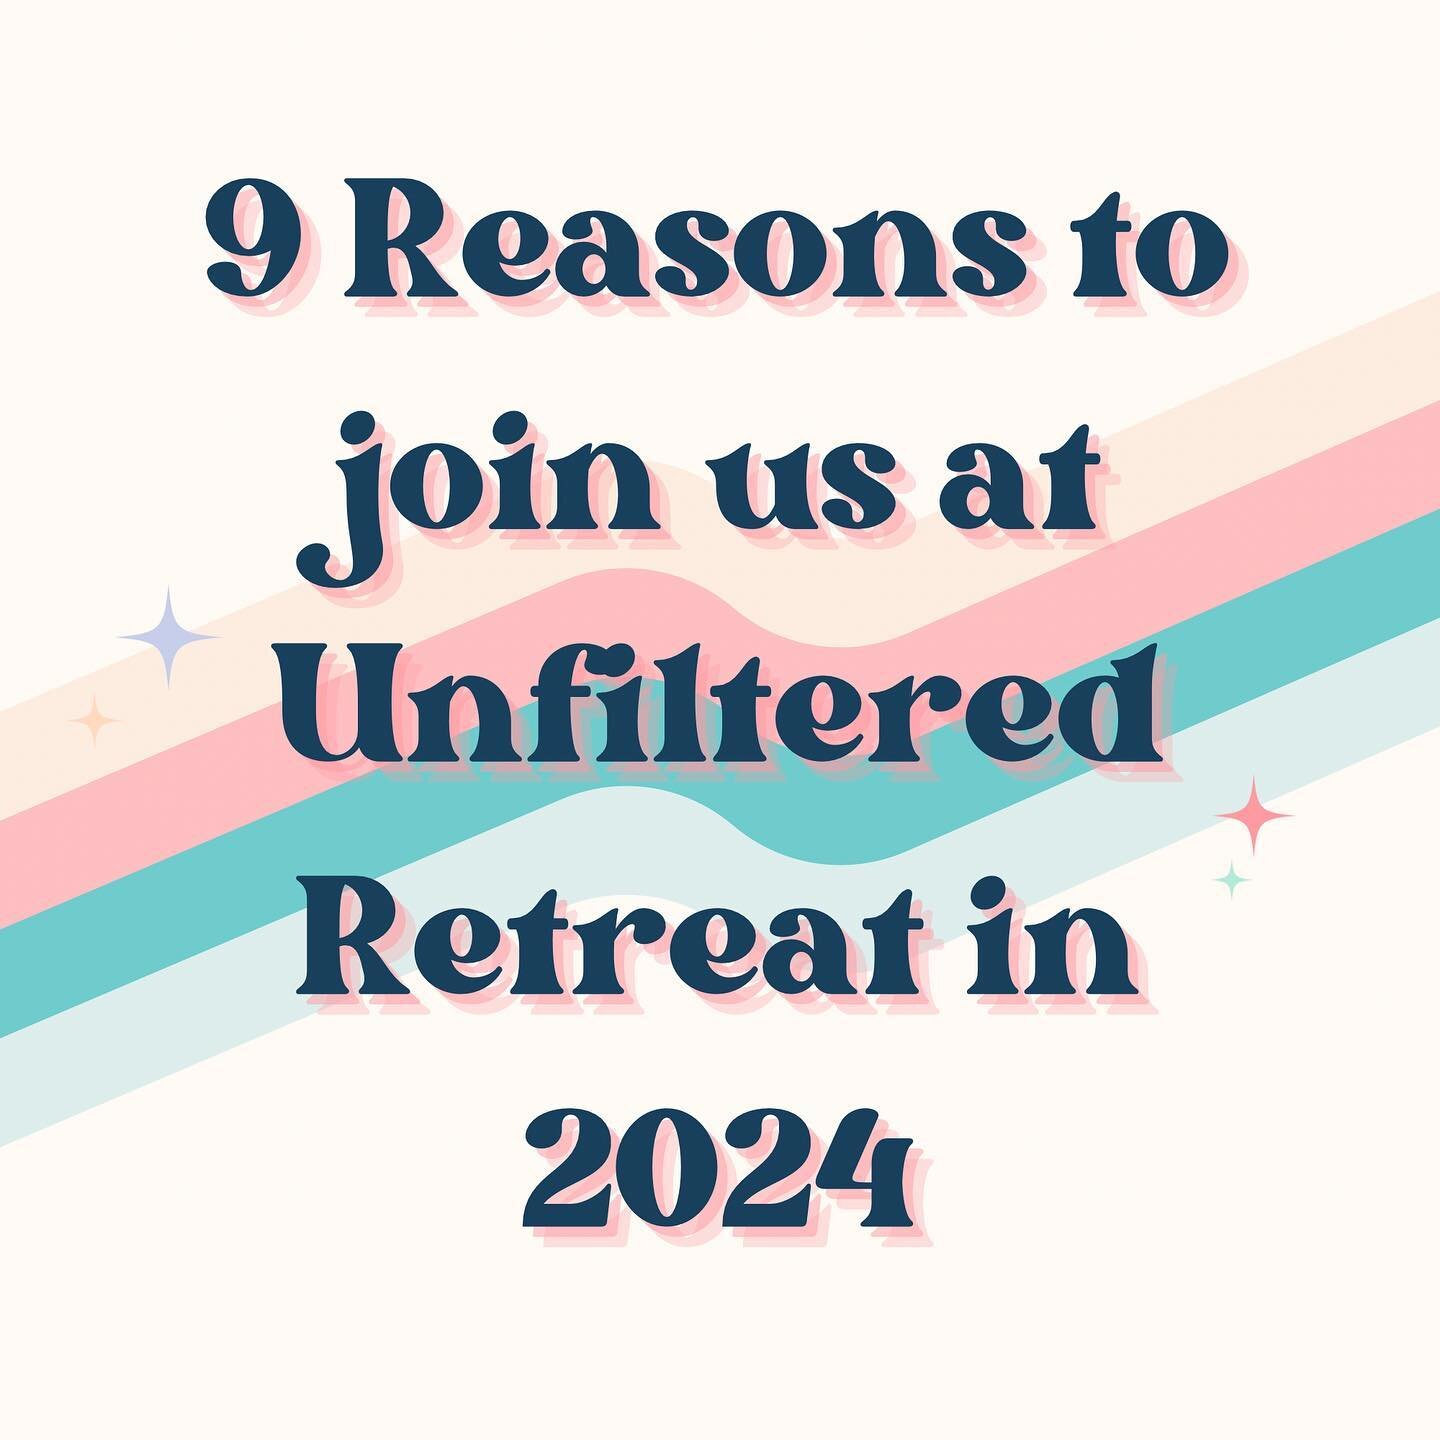 Still unsure about coming to Unfiltered Retreat?

Here&rsquo;s 9 reasons we think you should join us in 2024.

And if that&rsquo;s convinced you, get yourself on our waitlist for first dibs when early bird tickets go on sale next week!